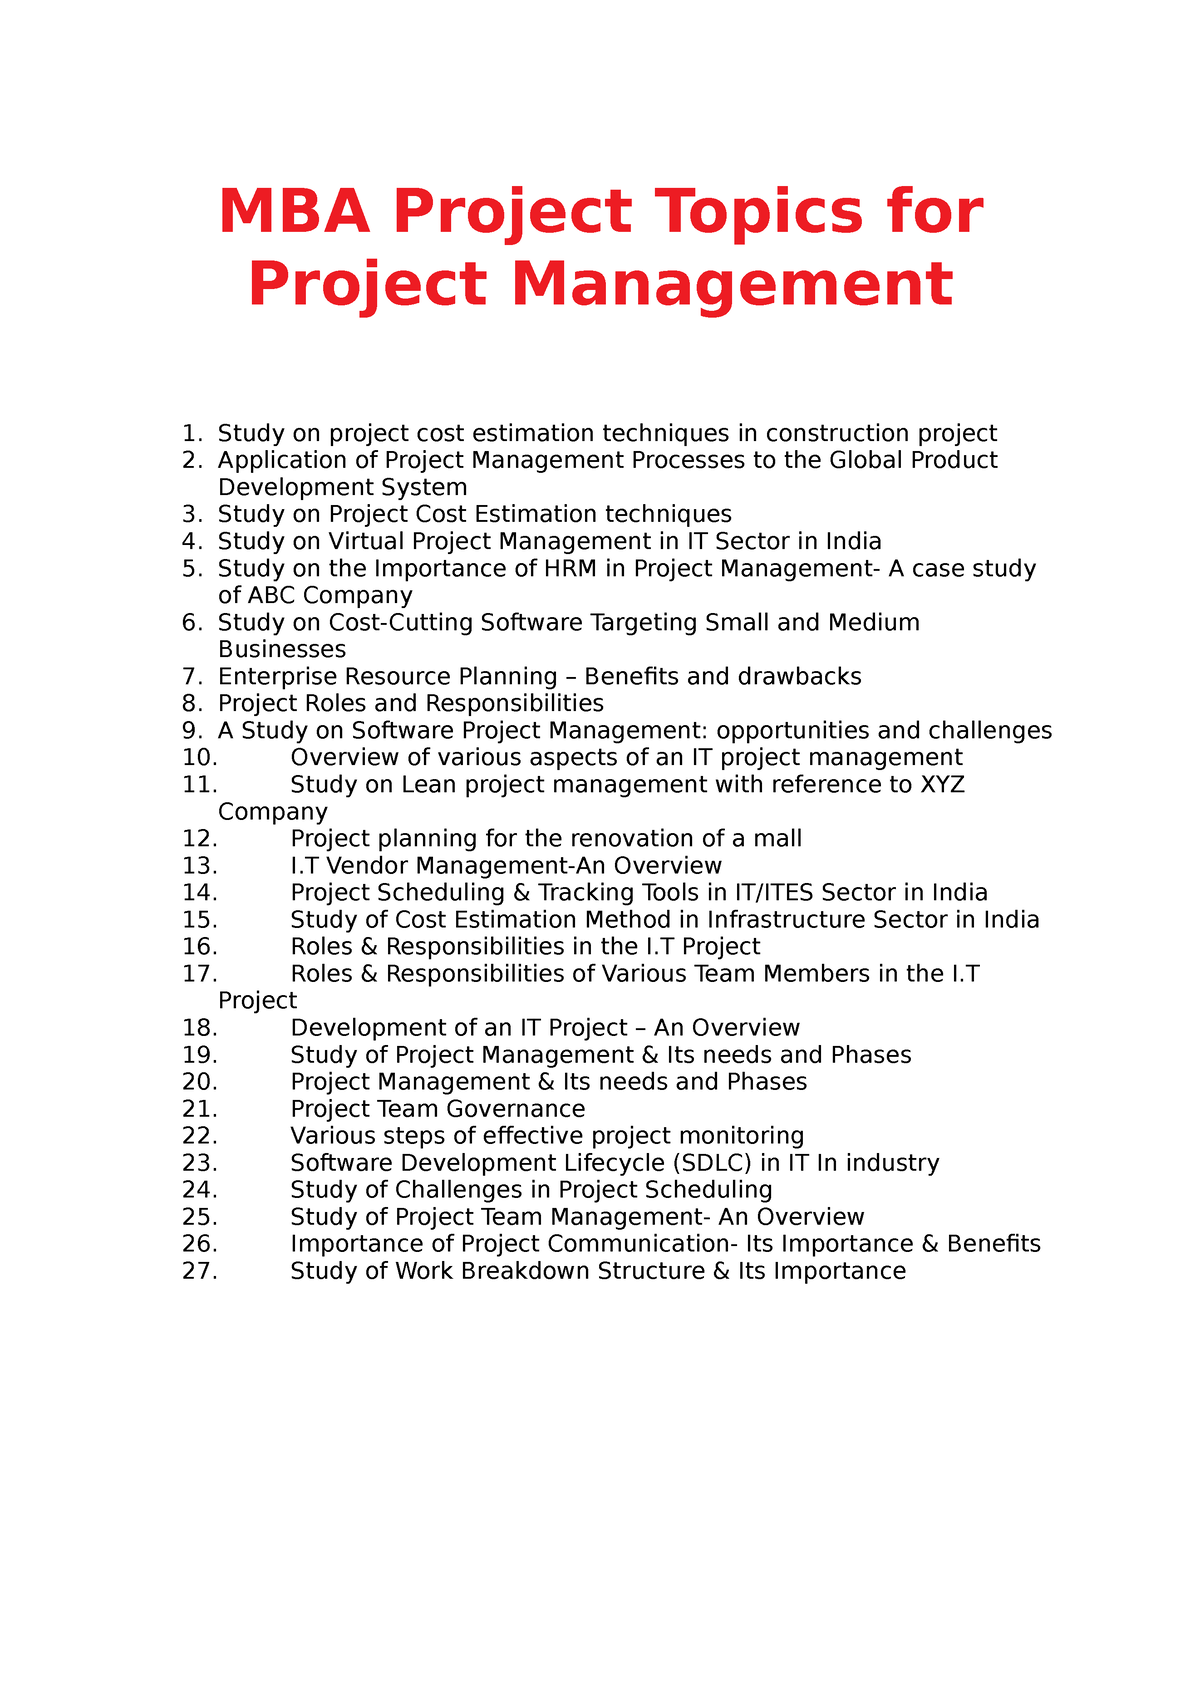 mba project management thesis topics